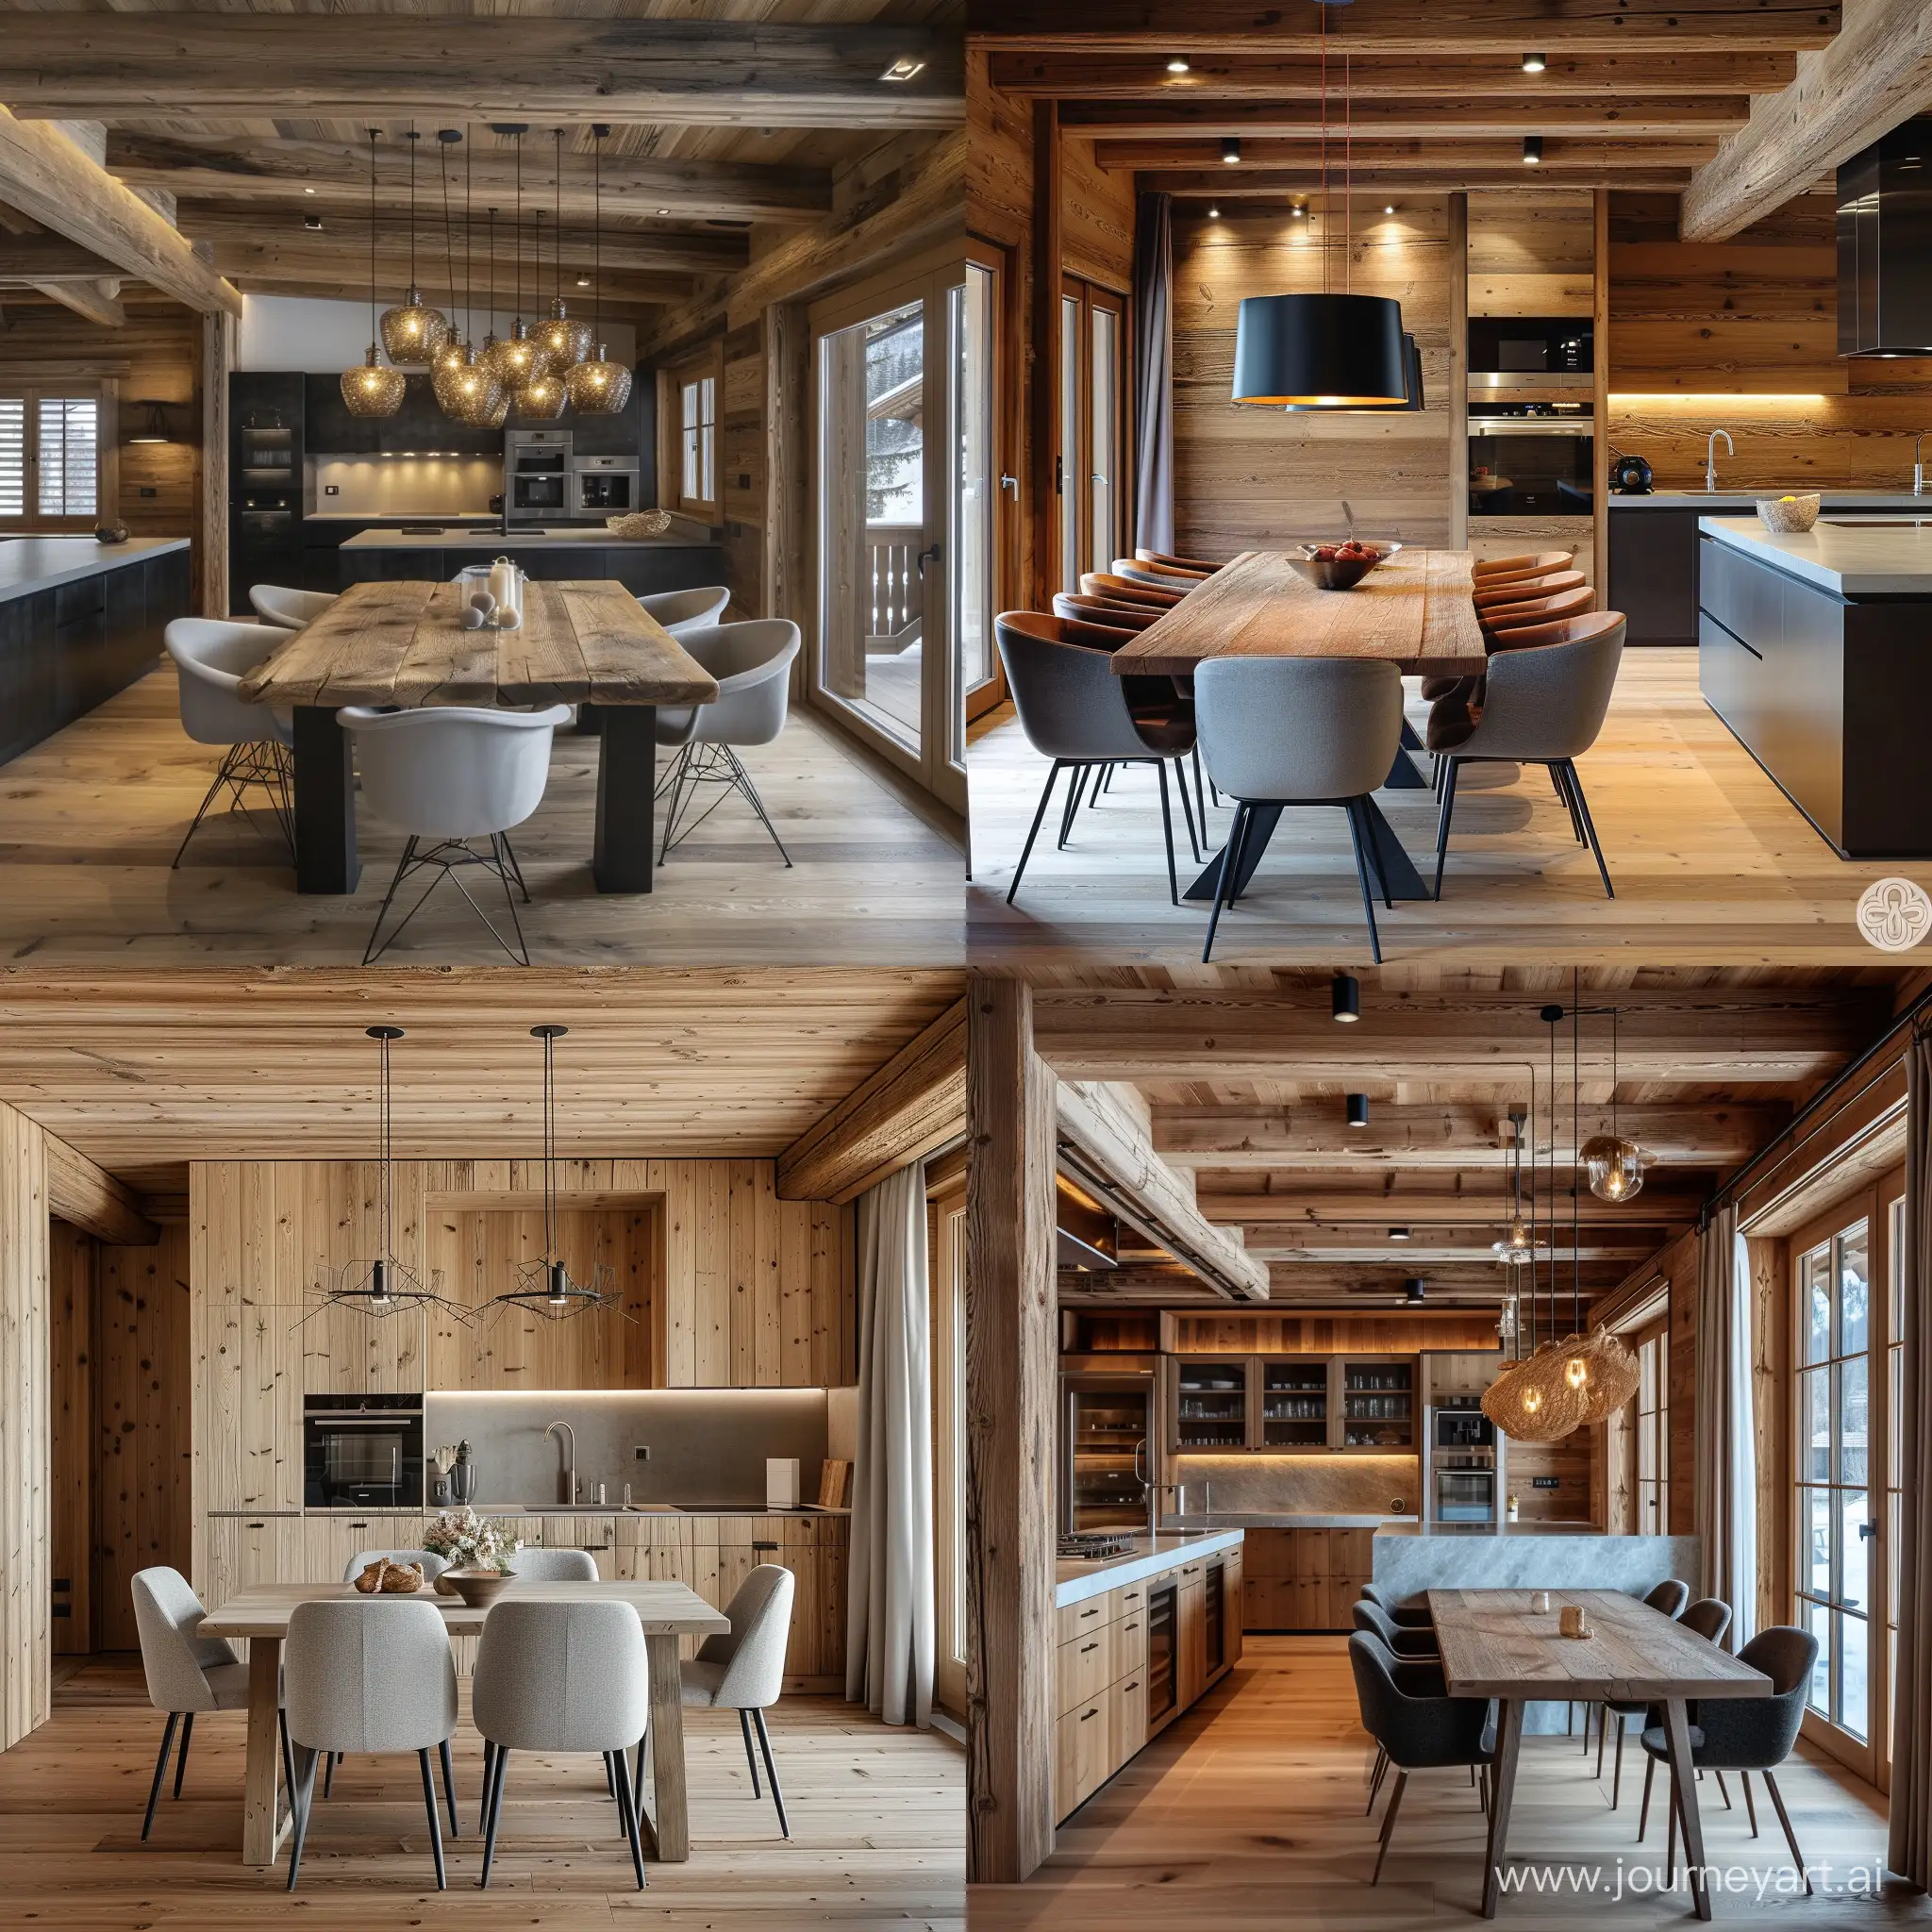 Cozy-Chalet-Style-Kitchen-with-Wooden-Facades